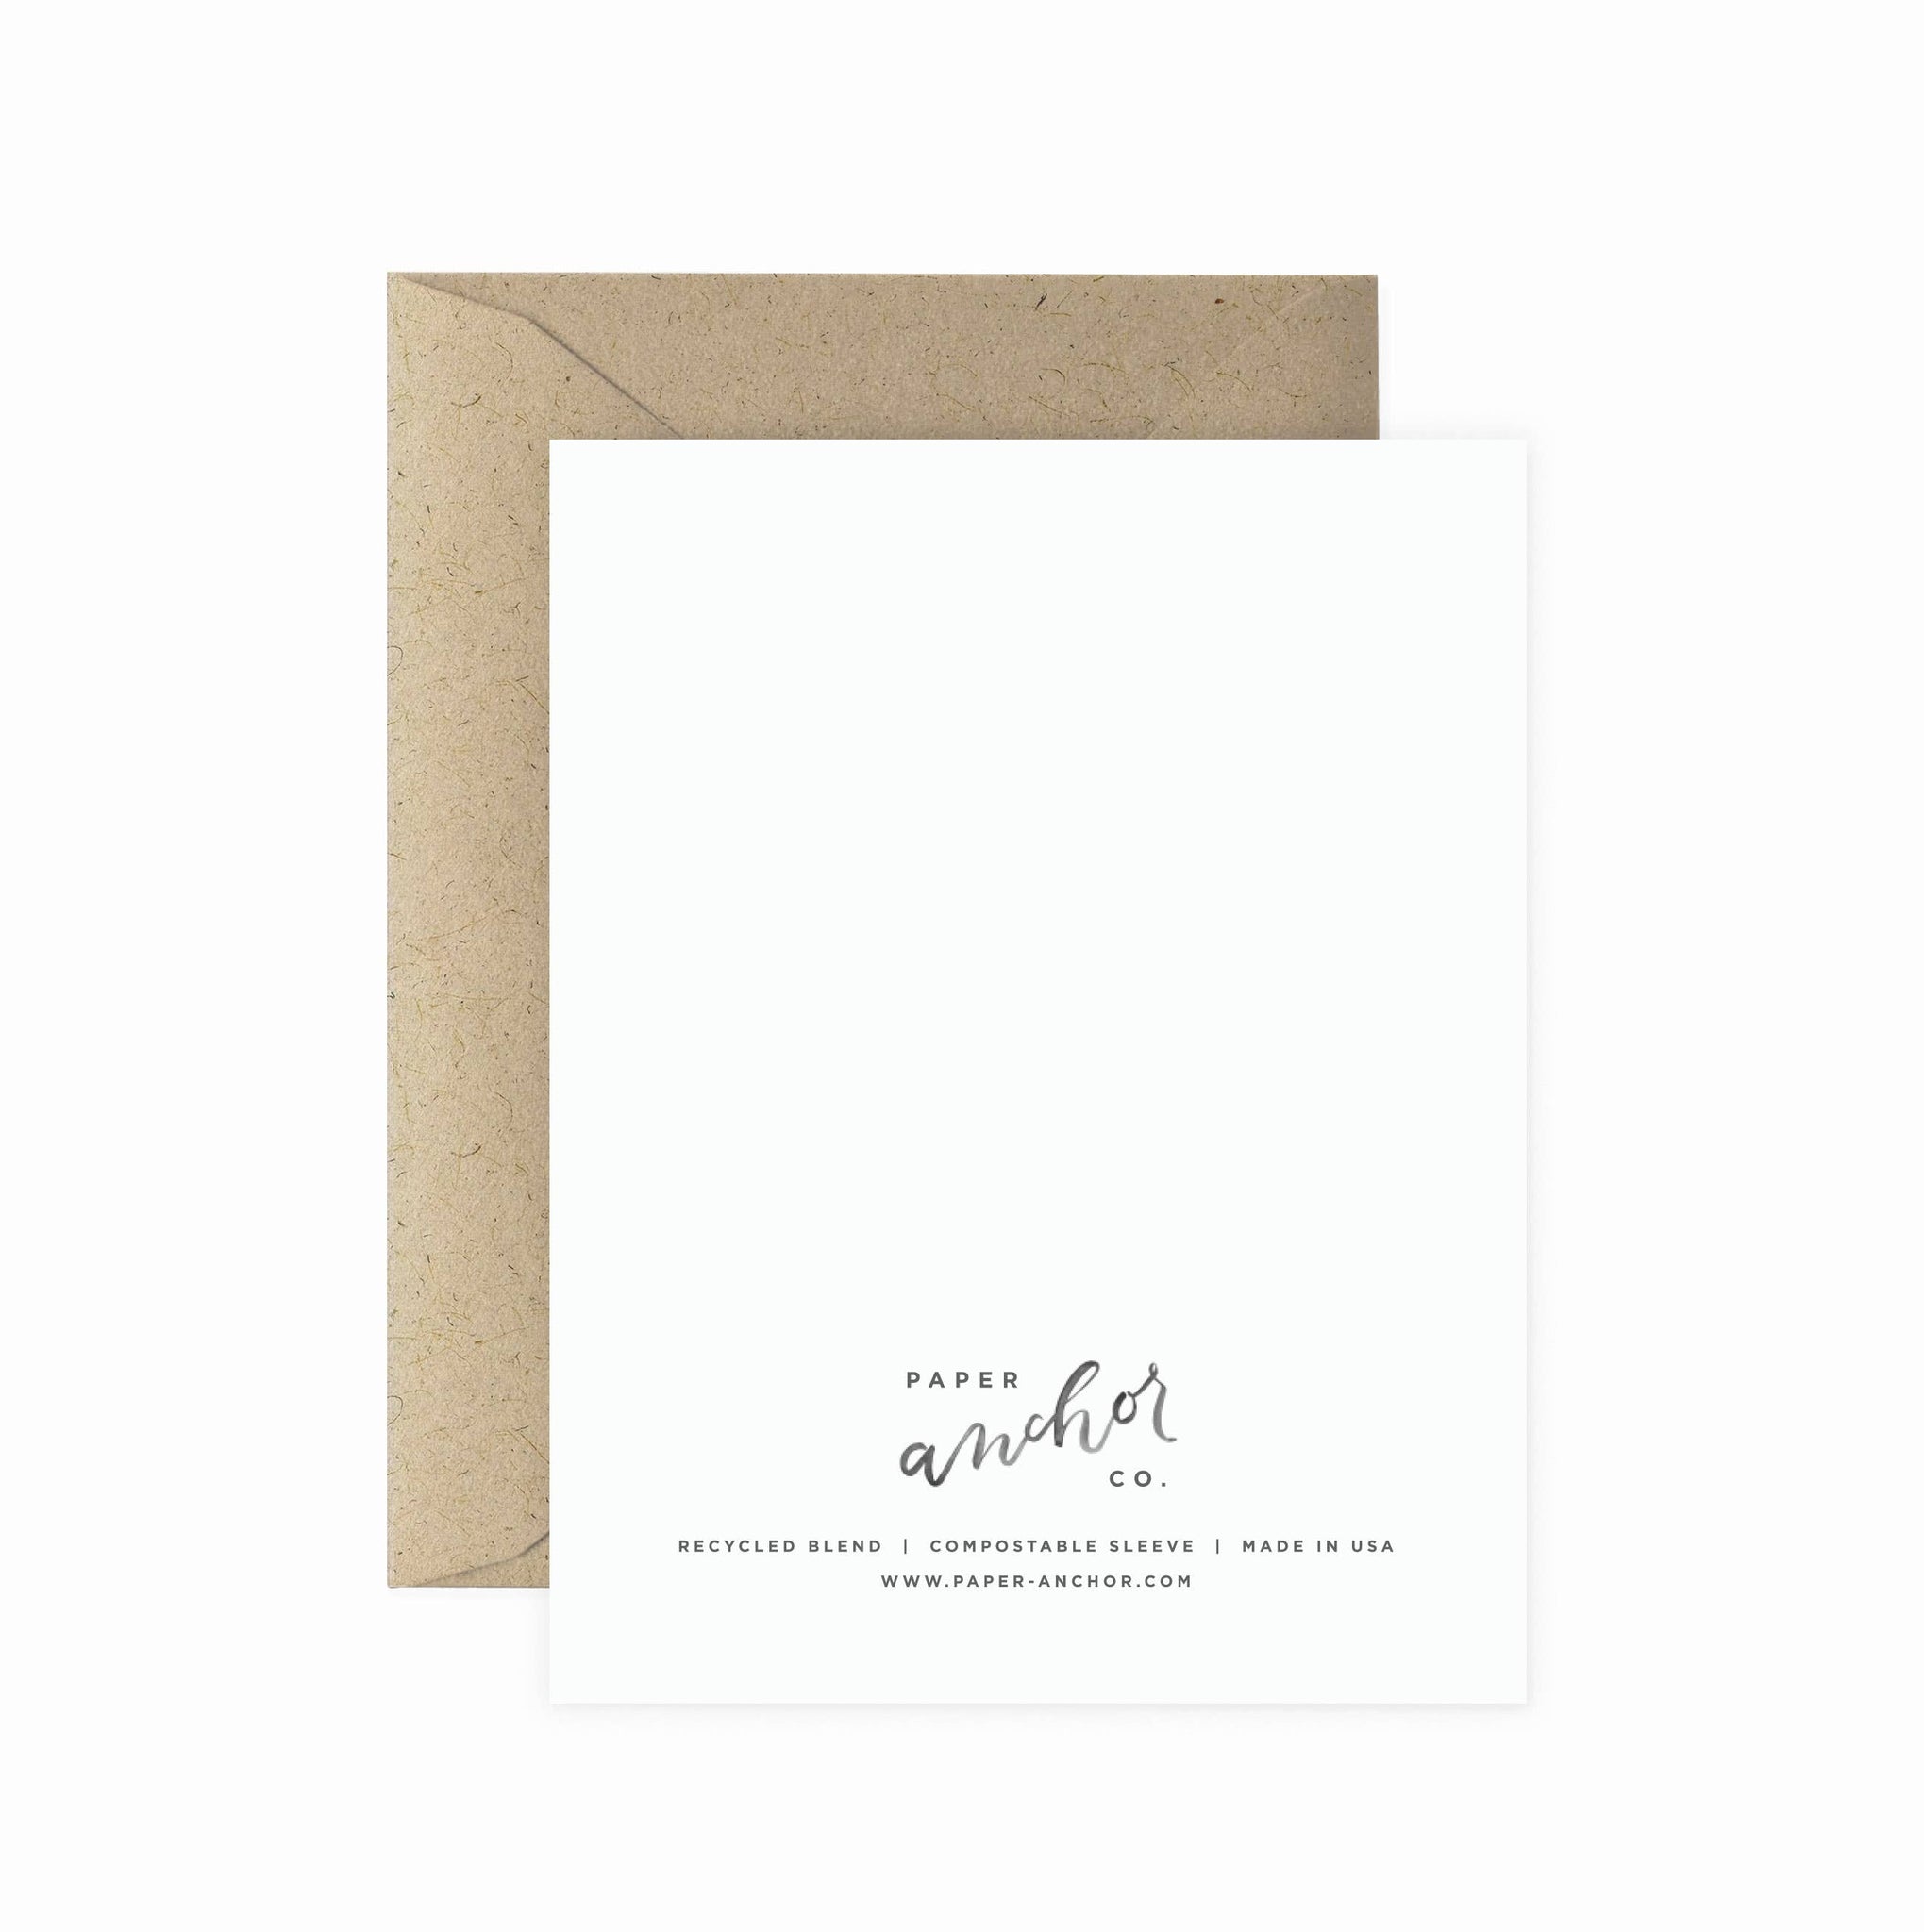 Wild About You Greeting Card | Valentine's Love Friendship